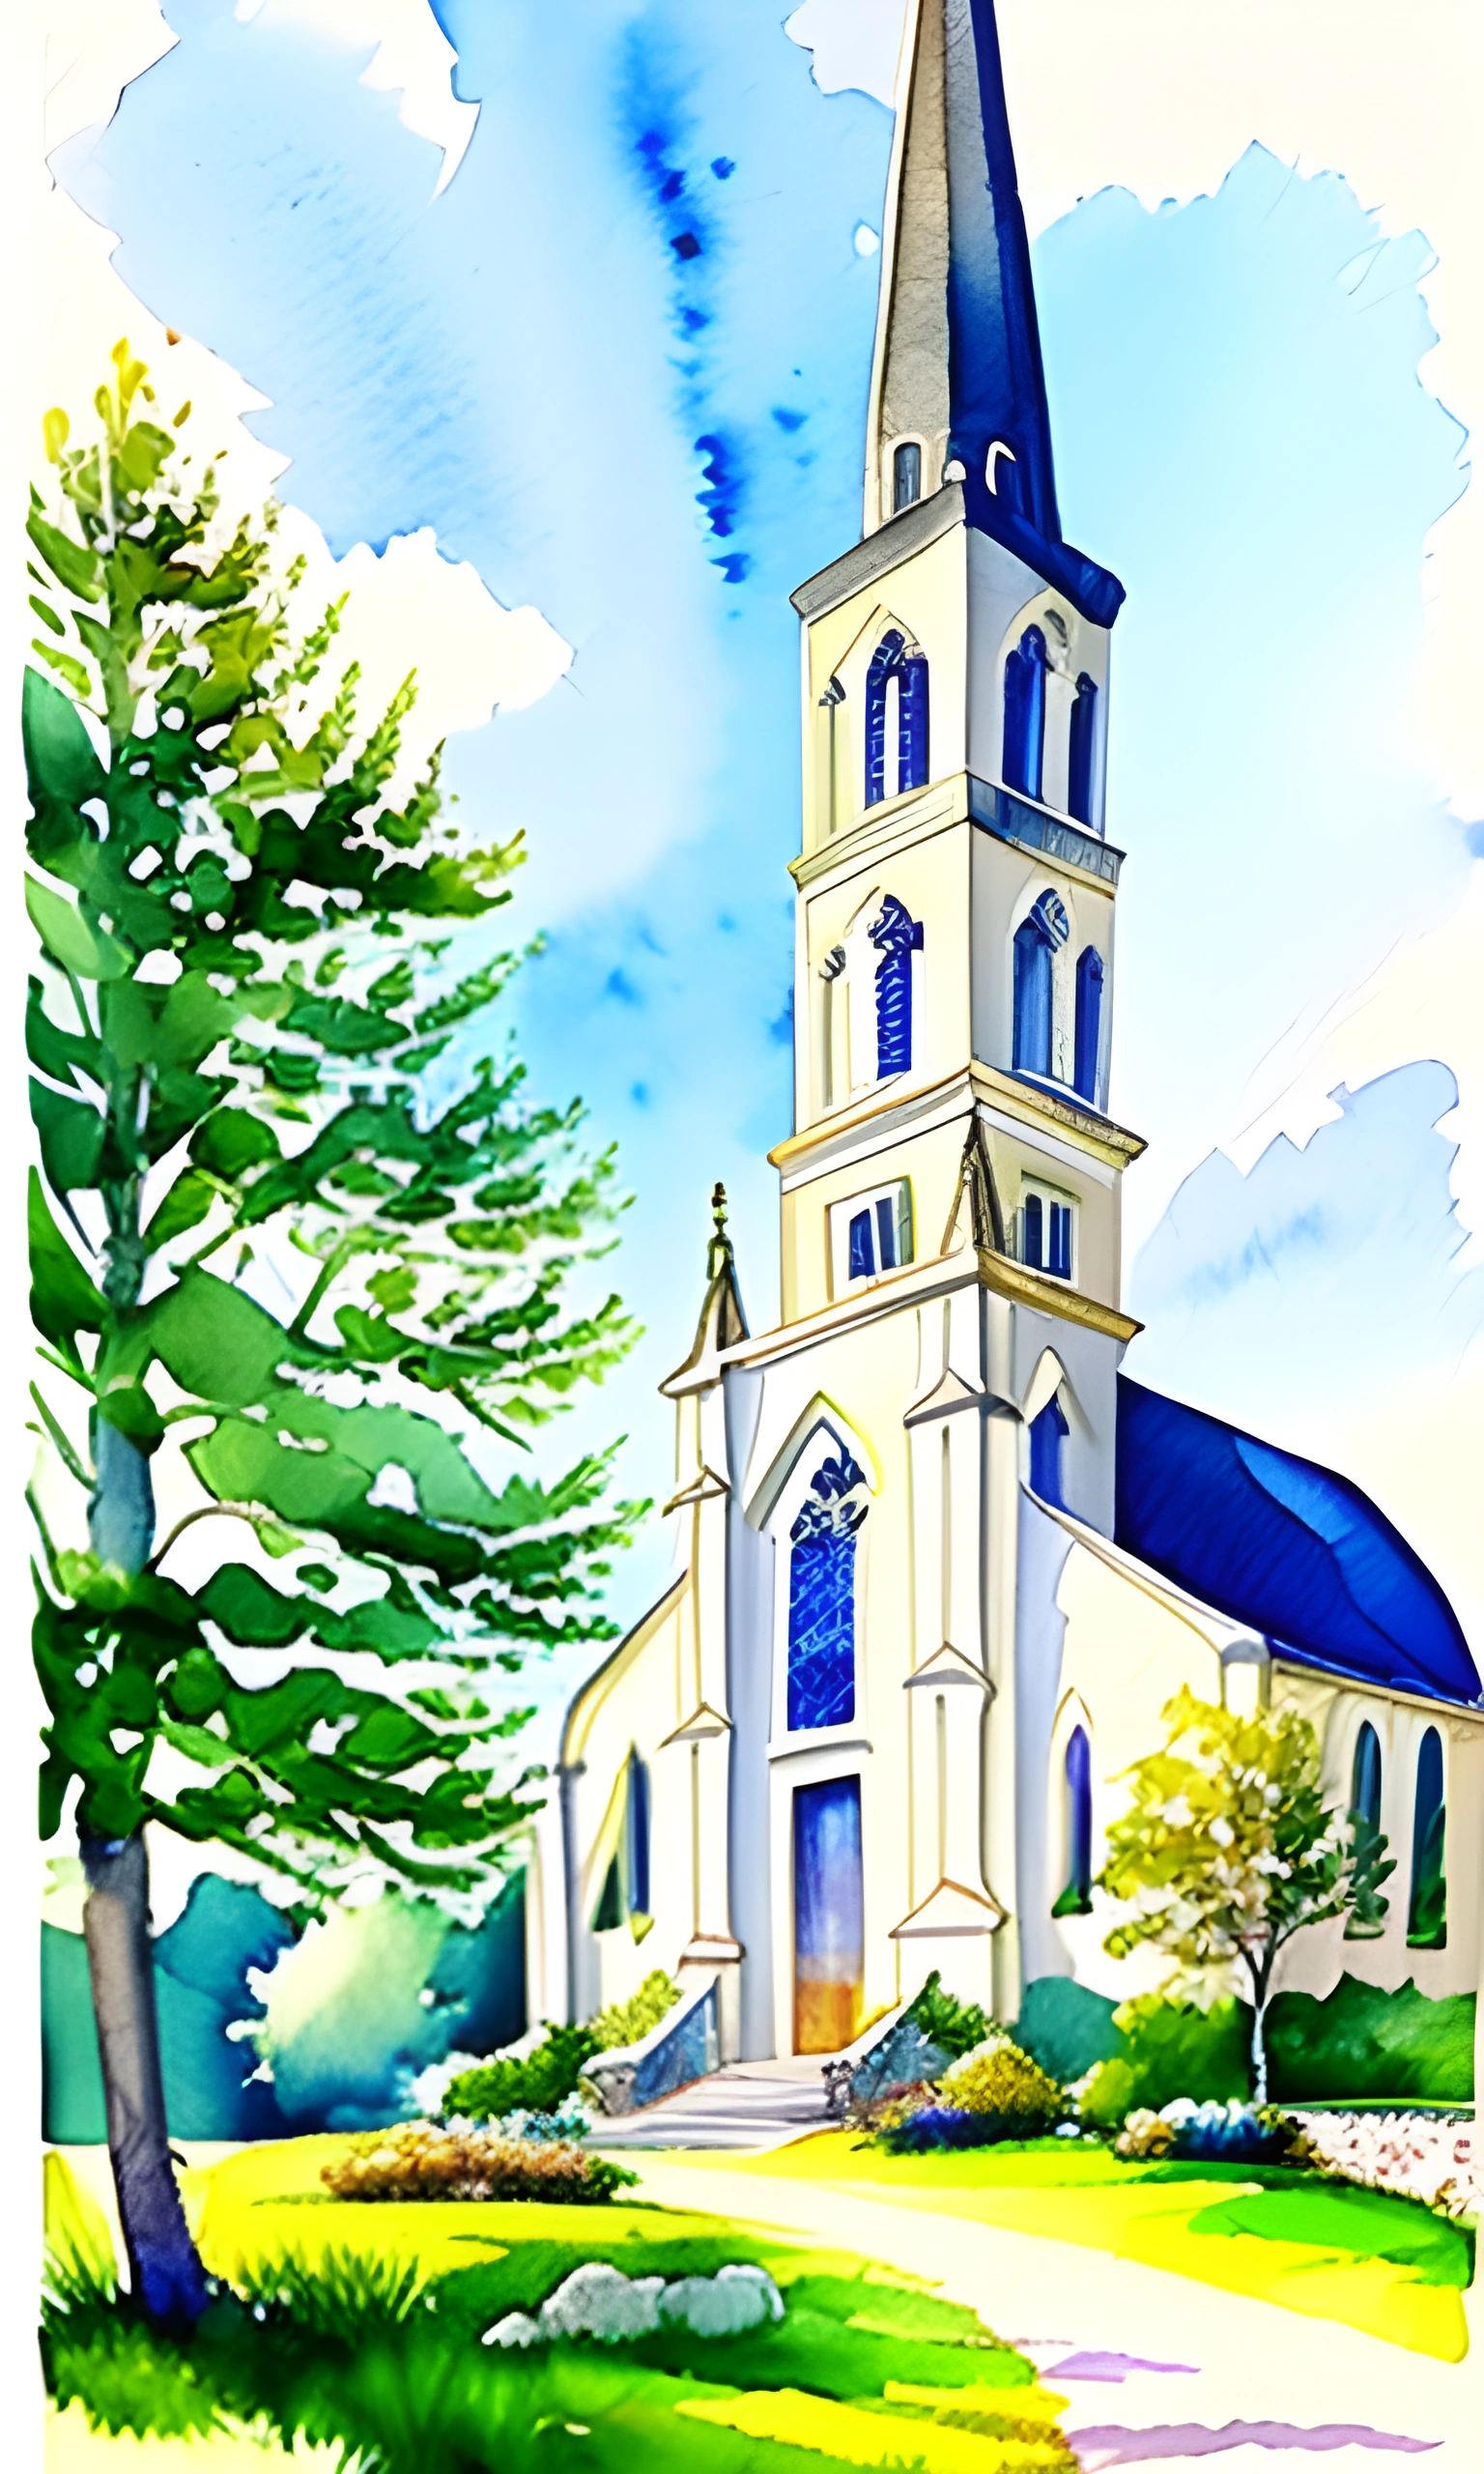 painting of a church with a steeple and a blue roof